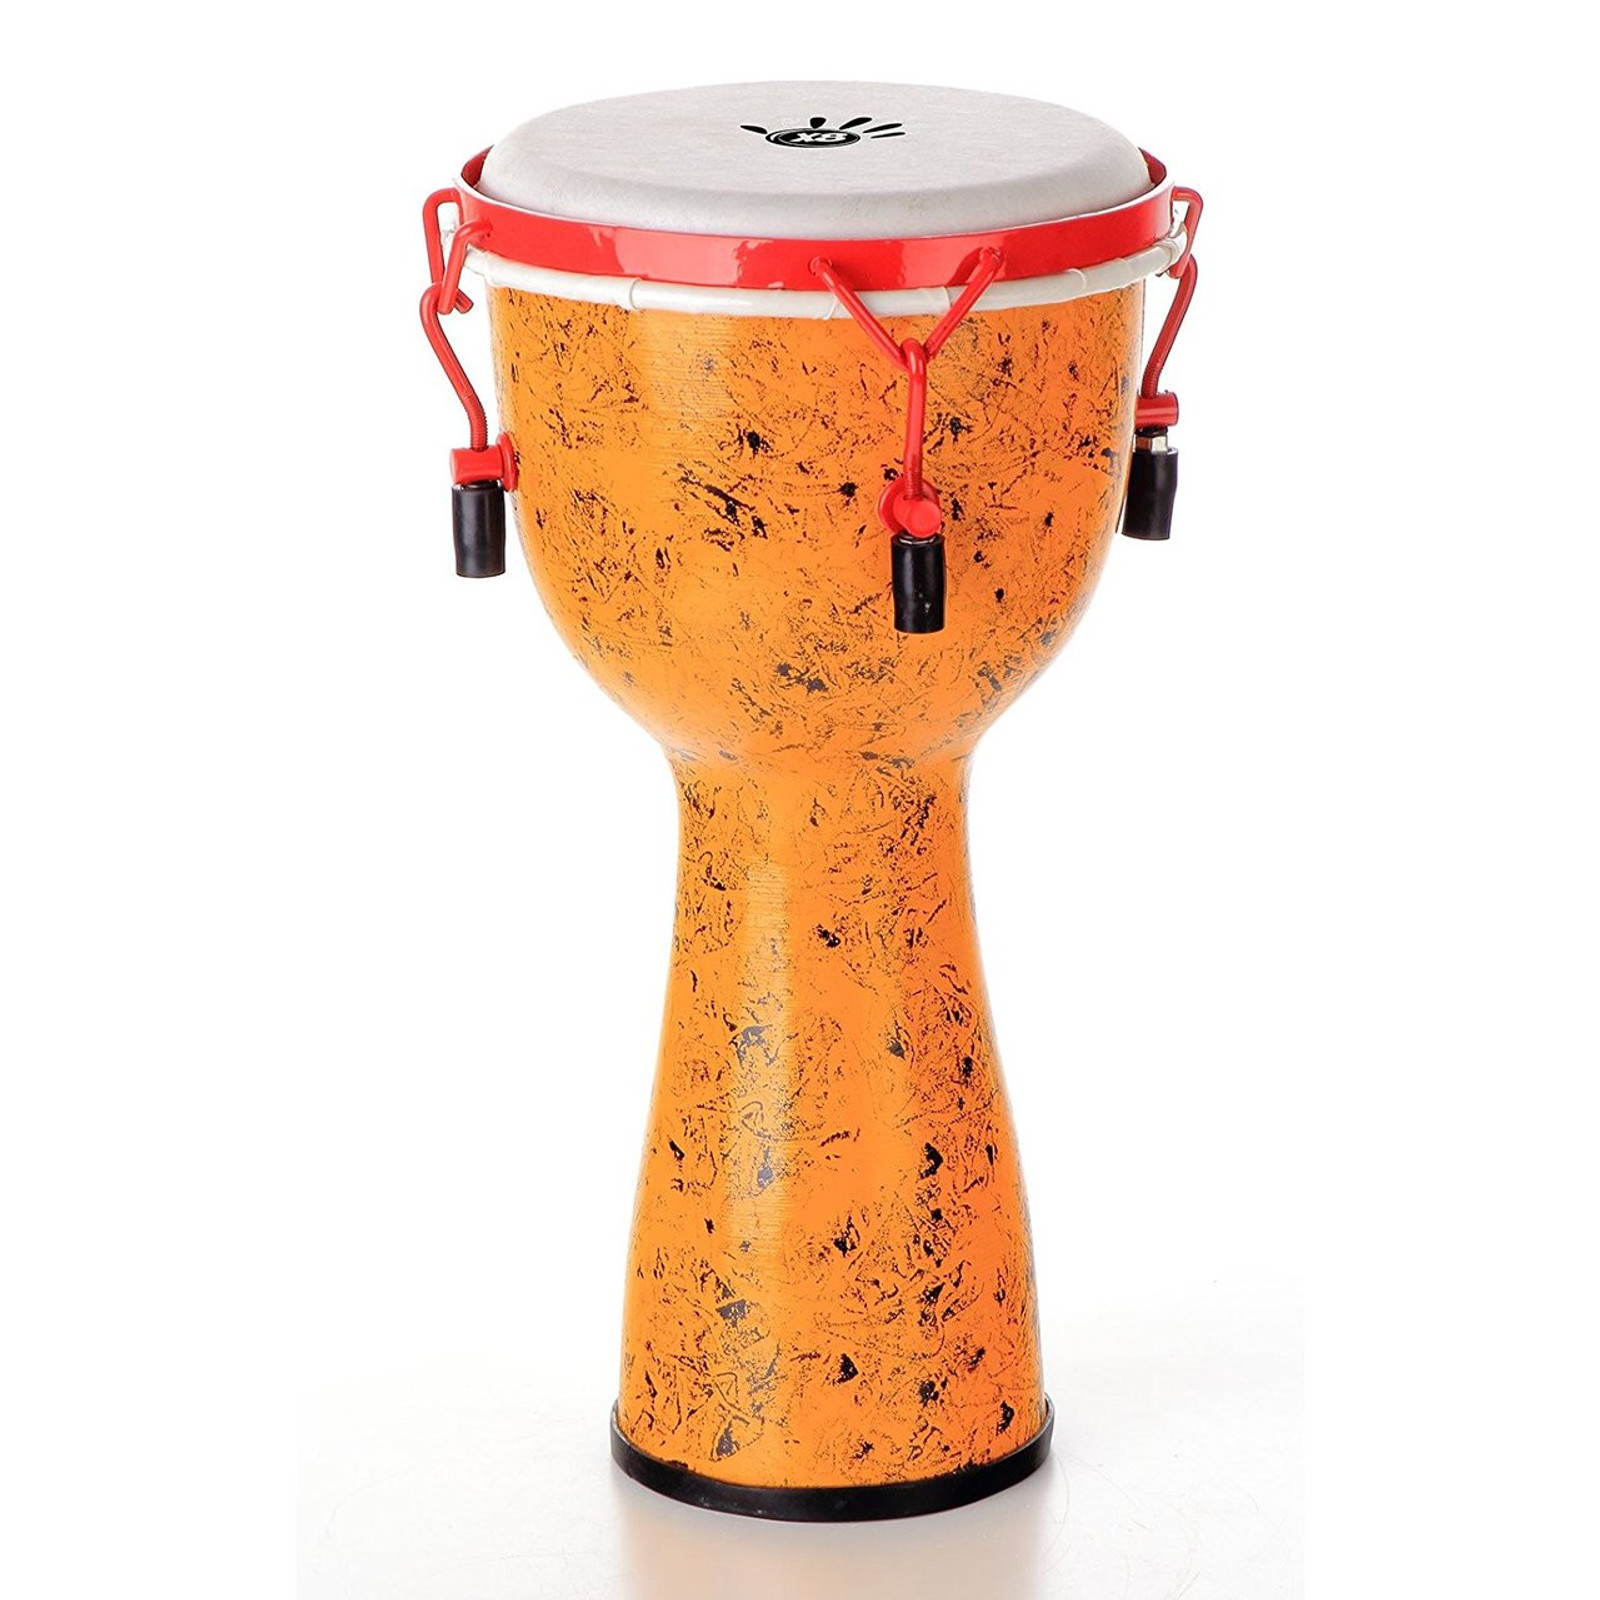 X8 Drums Urban Beat Key Tuned Djembe with Synthetic Head, Backpacker